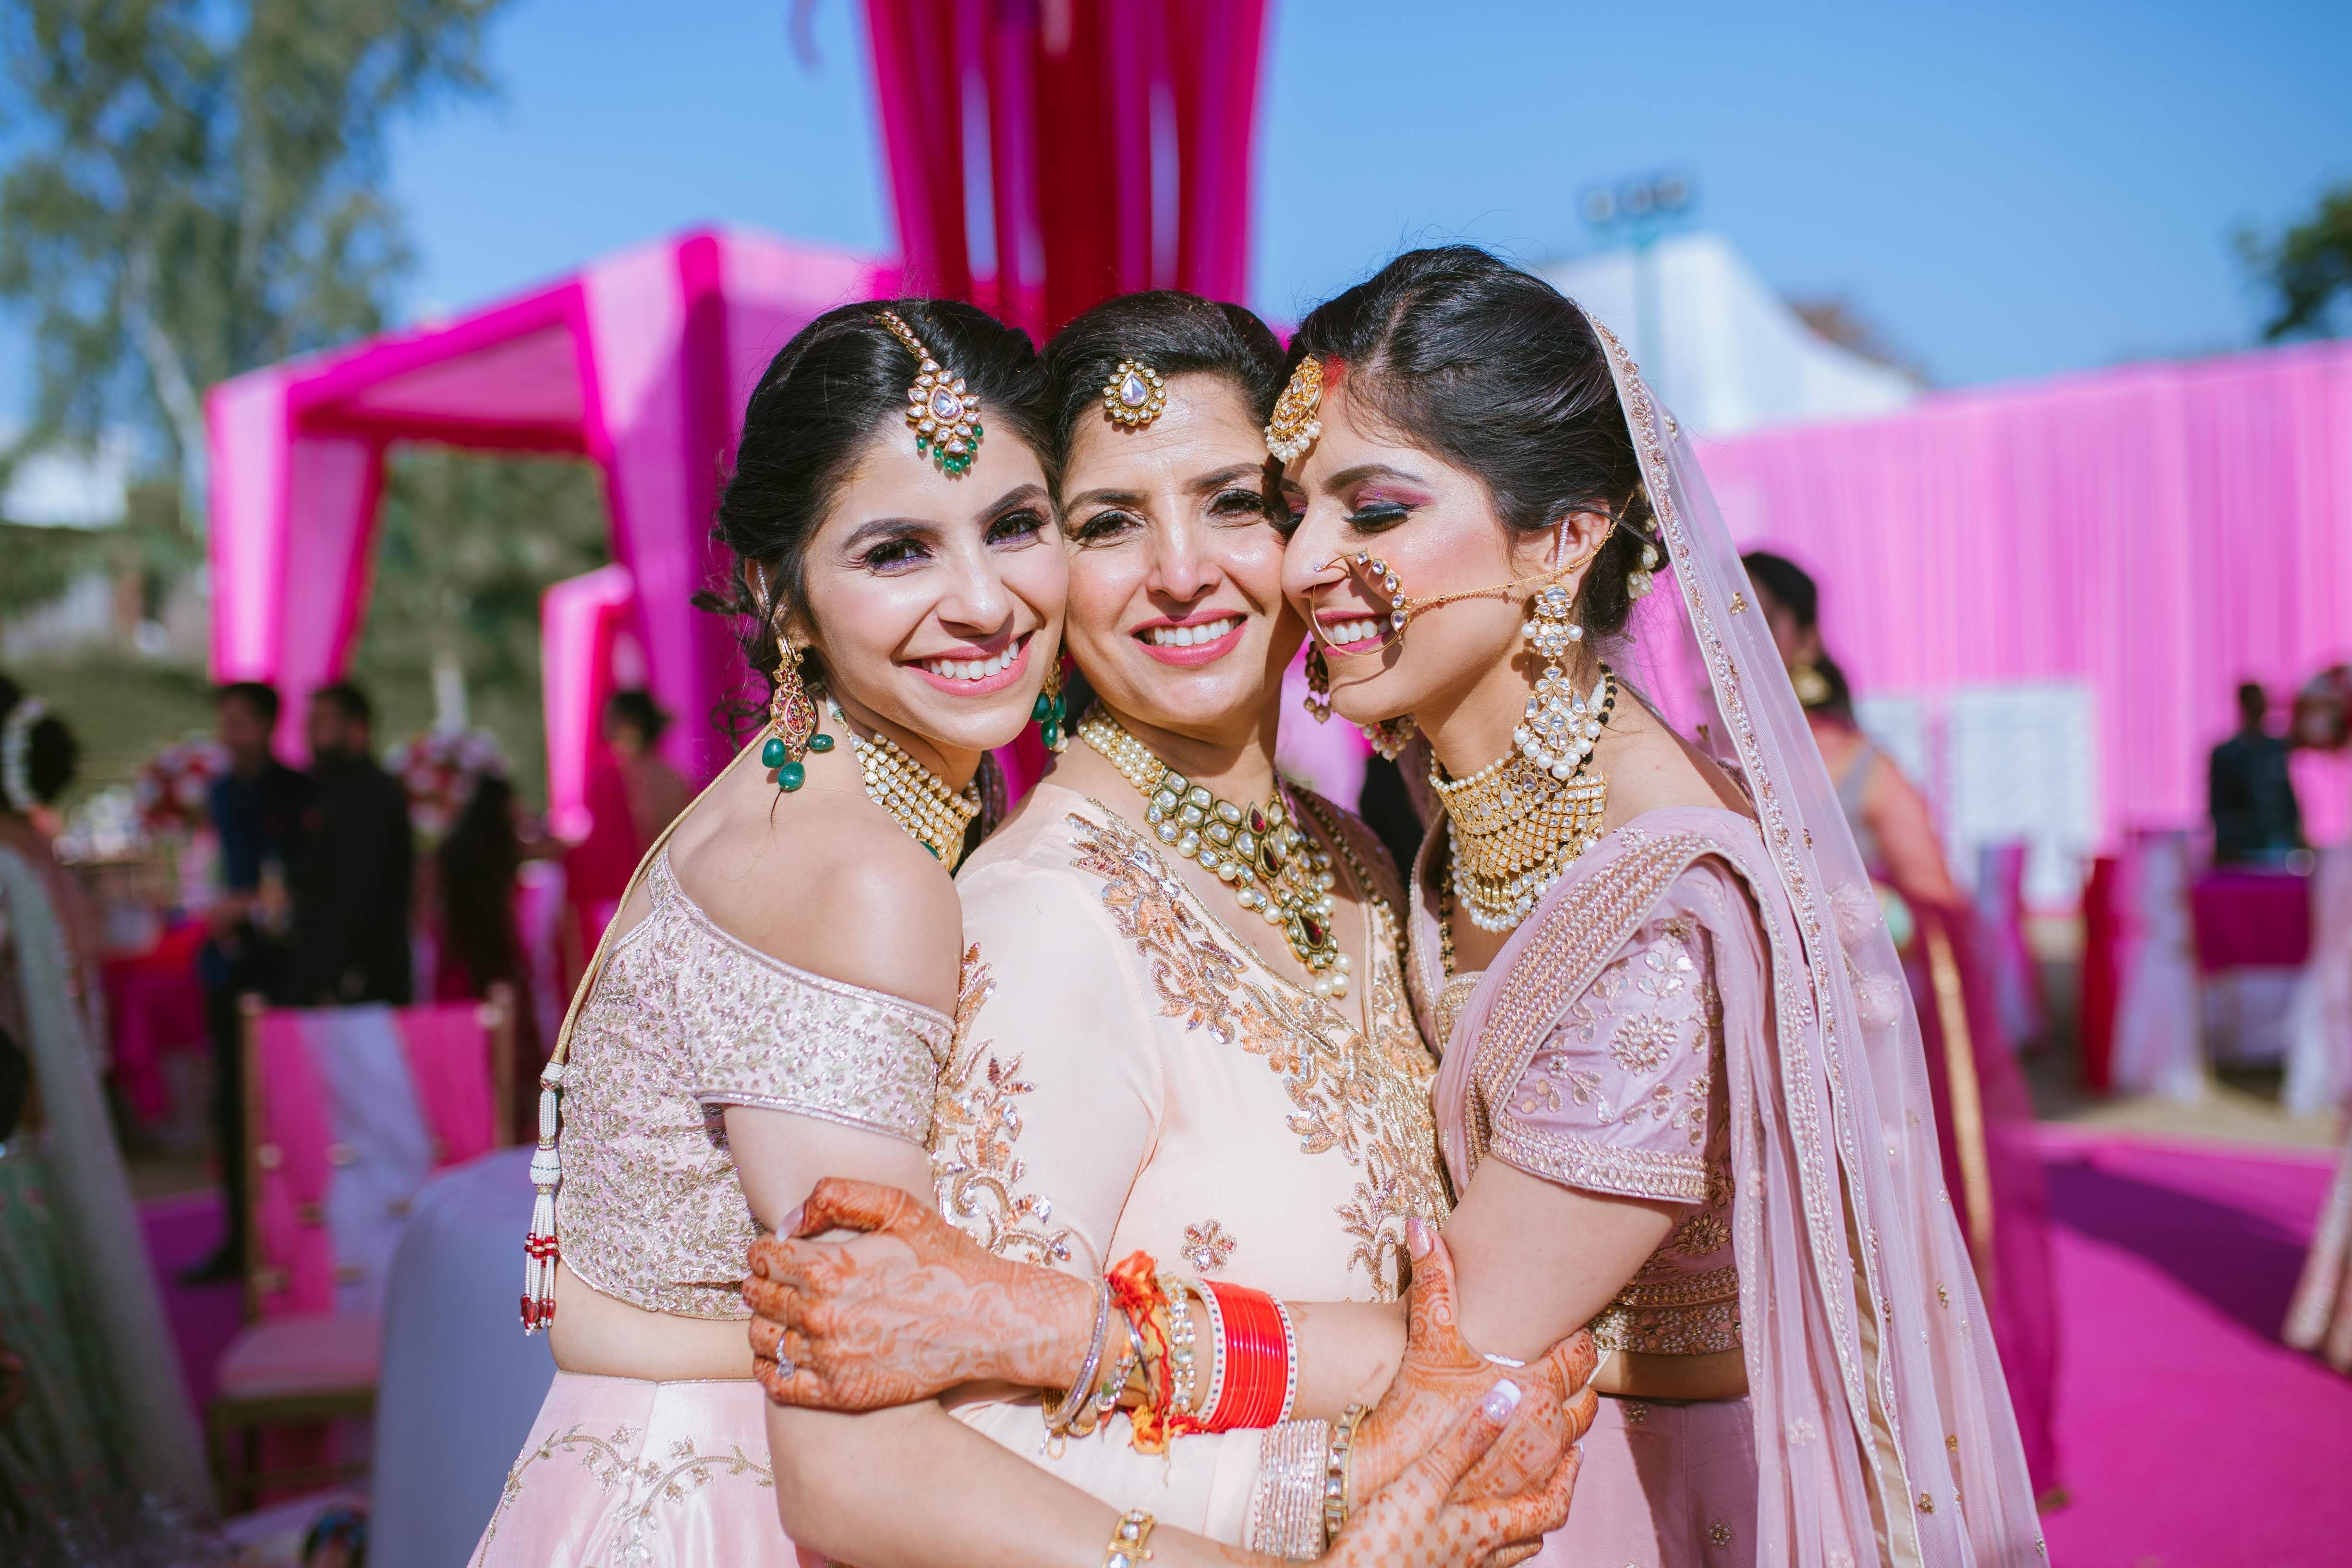 Pin by Heer 😘 on Bridals | Indian wedding photography poses, Sisters  photoshoot poses, Sisters photography poses